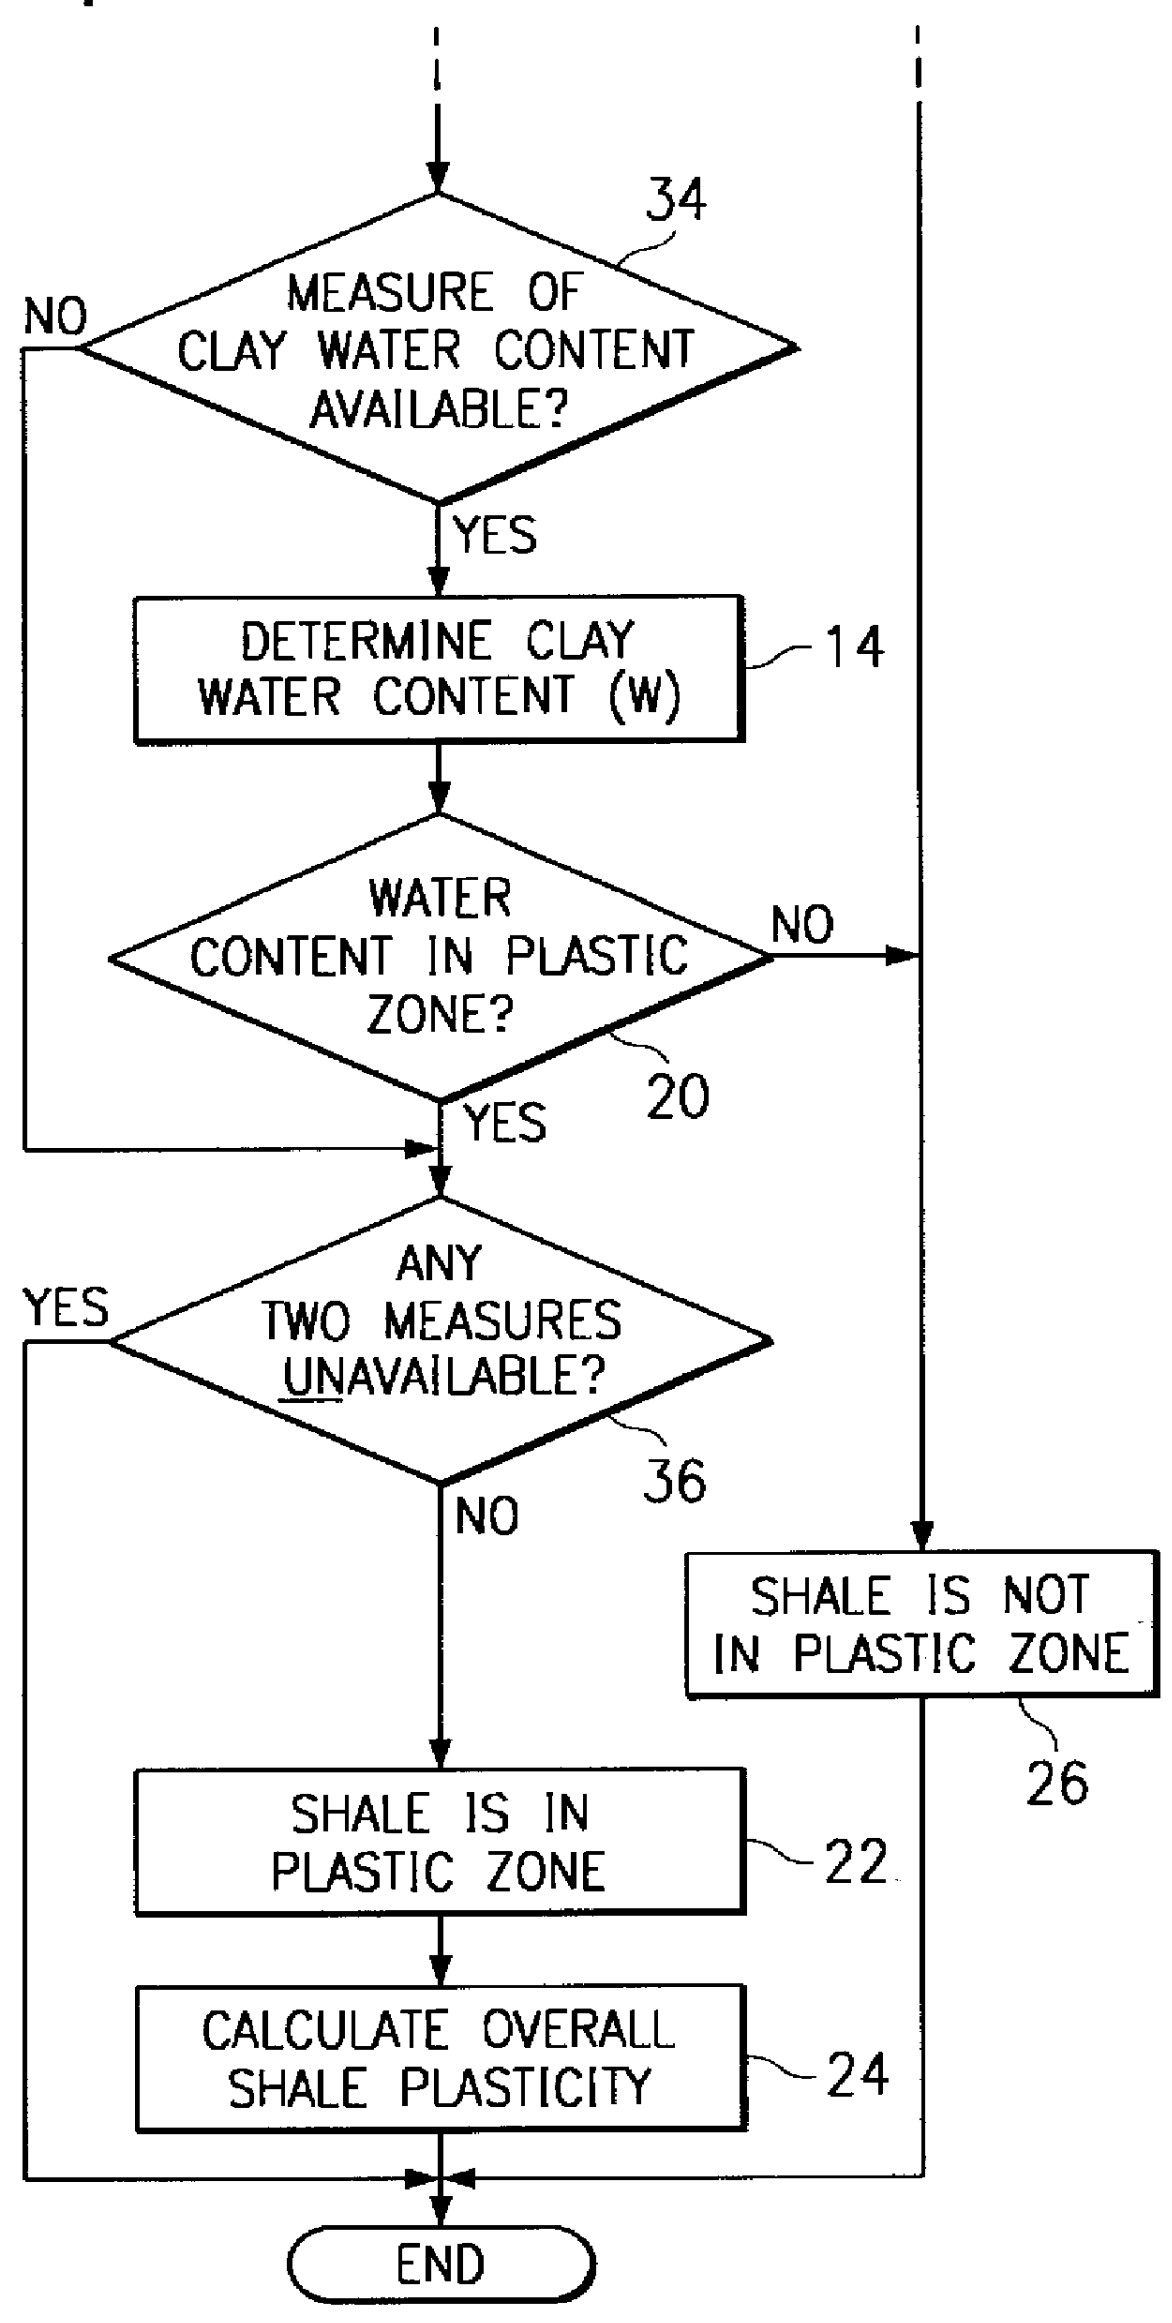 Method and apparatus for quantifying shale plasticity from well logs